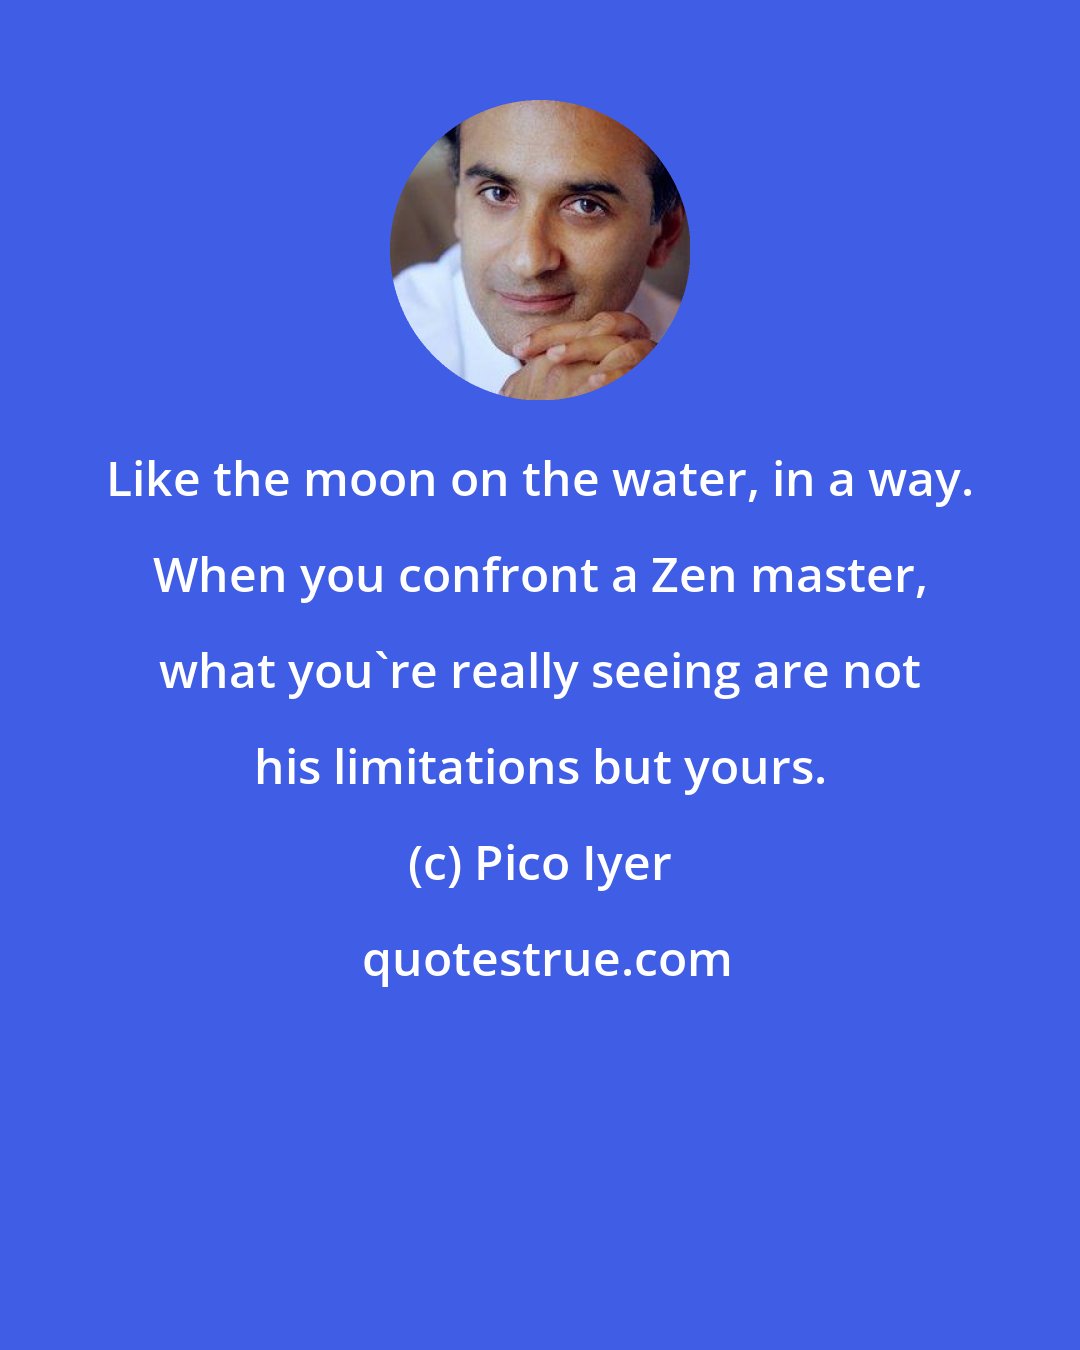 Pico Iyer: Like the moon on the water, in a way. When you confront a Zen master, what you're really seeing are not his limitations but yours.